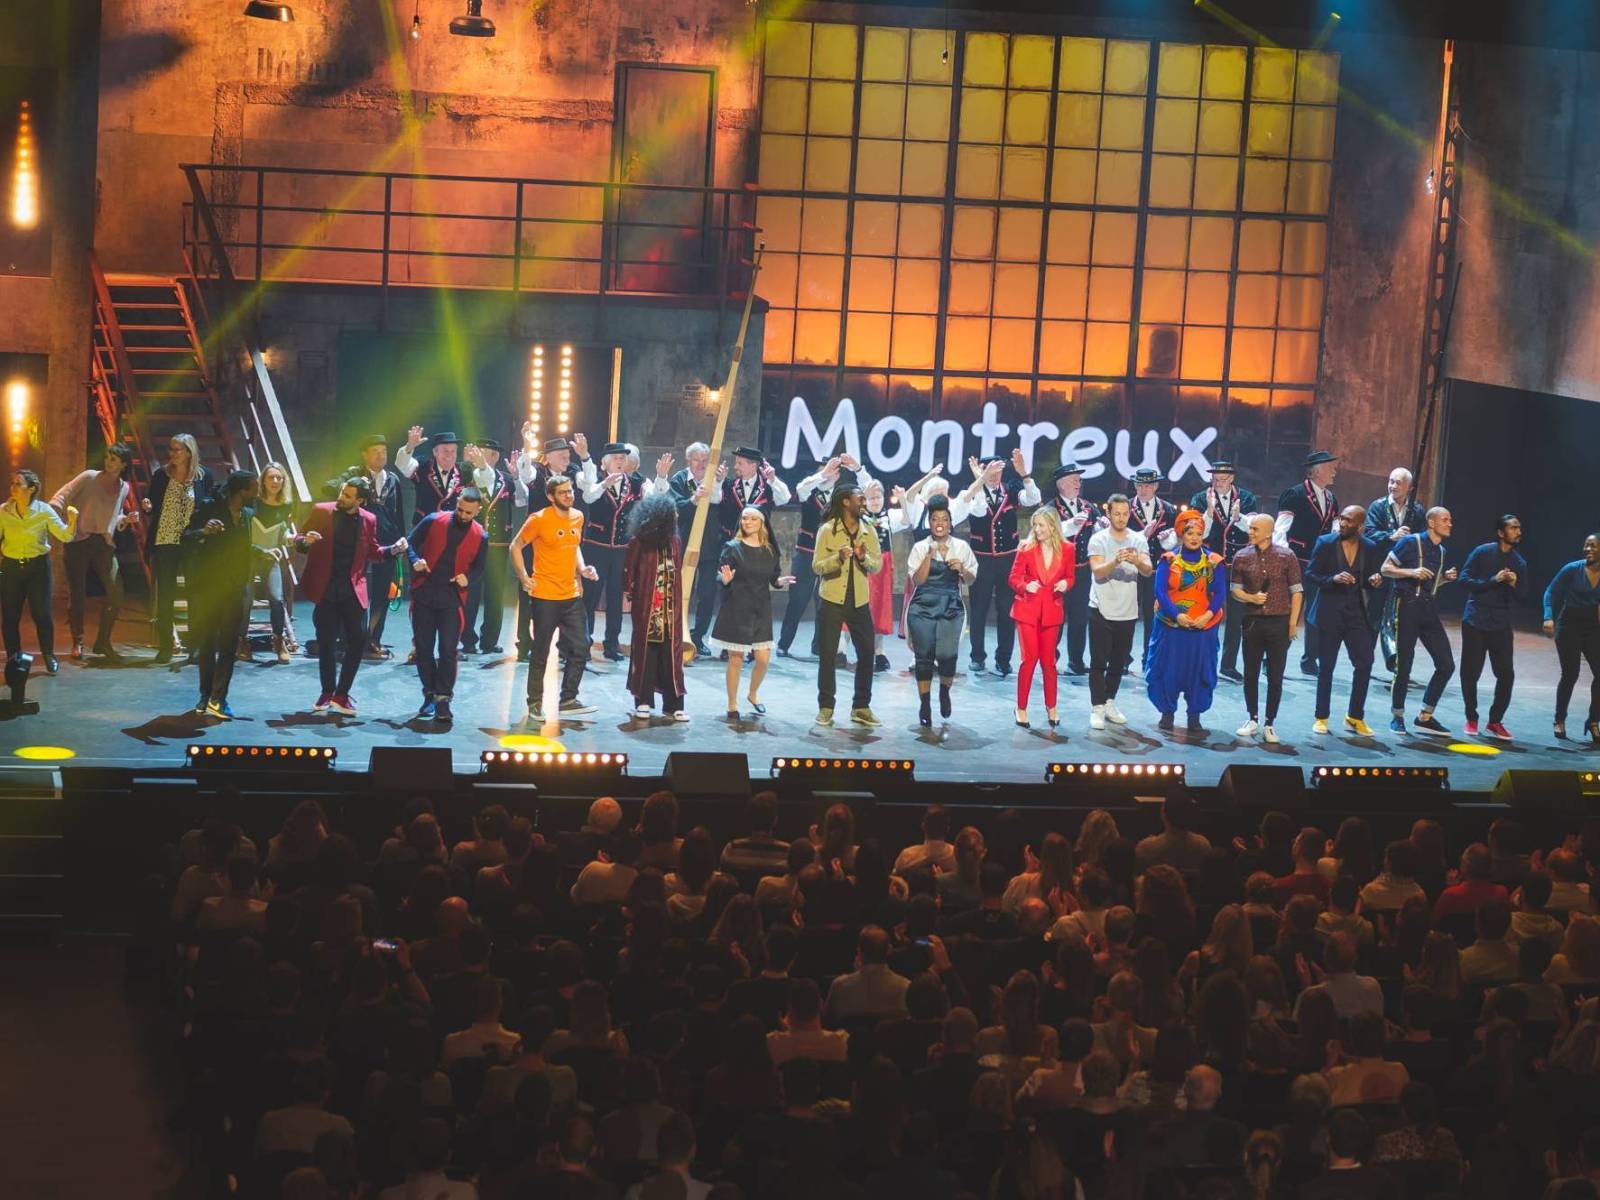 Montreux Comedy Festival 2022 from the 23rd november to the 3rd december